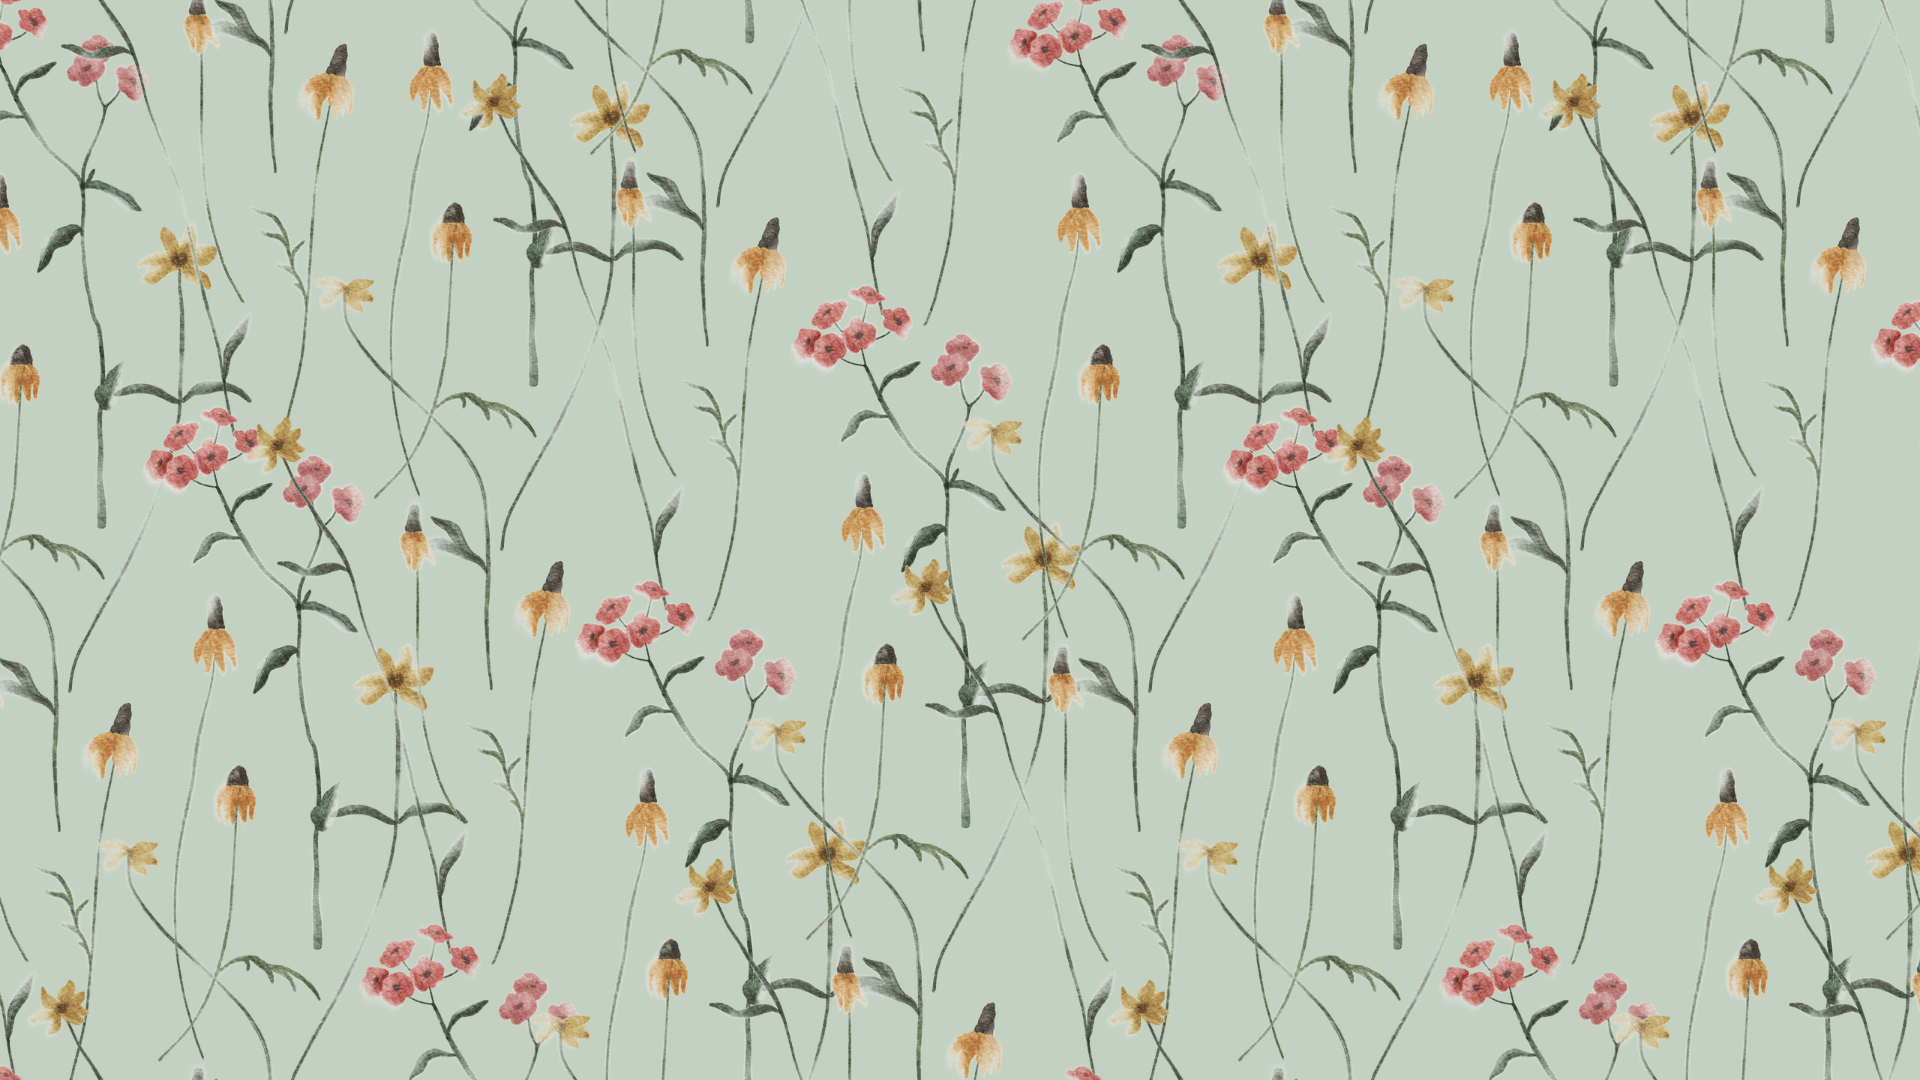 A floral pattern with small flowers on a green background. - Sage green